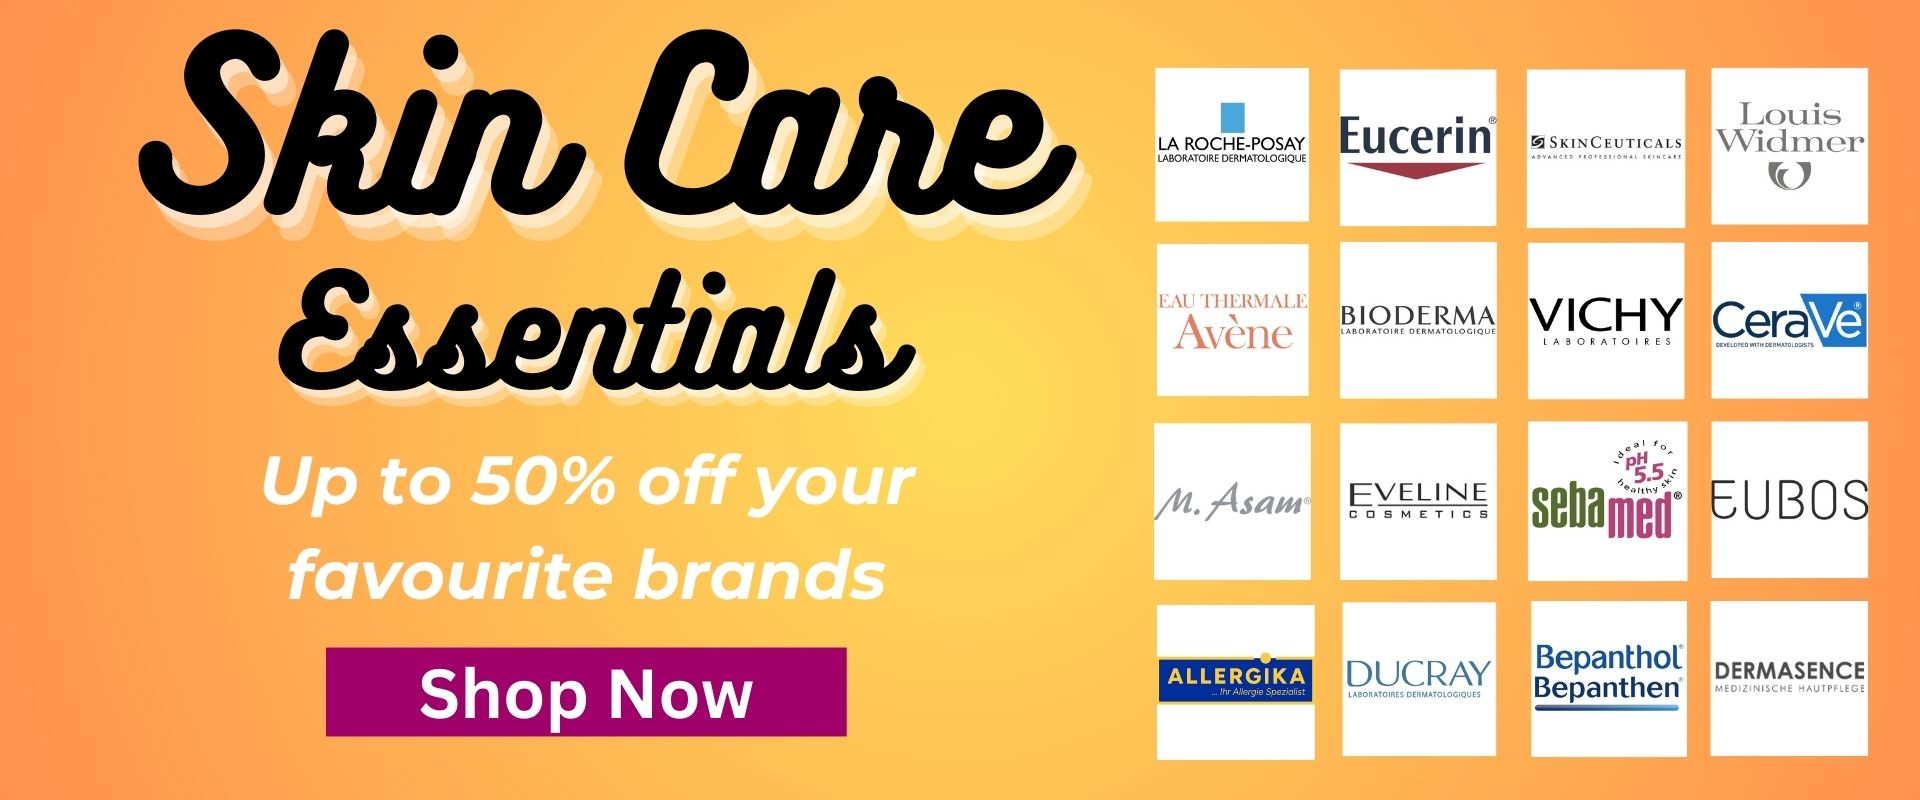 Dermatological Skin Care Sale - Included are Louis Widmer, SkinCeuticals, Eucerin, Dermasence, La Roche-Posay, Allergika and many more